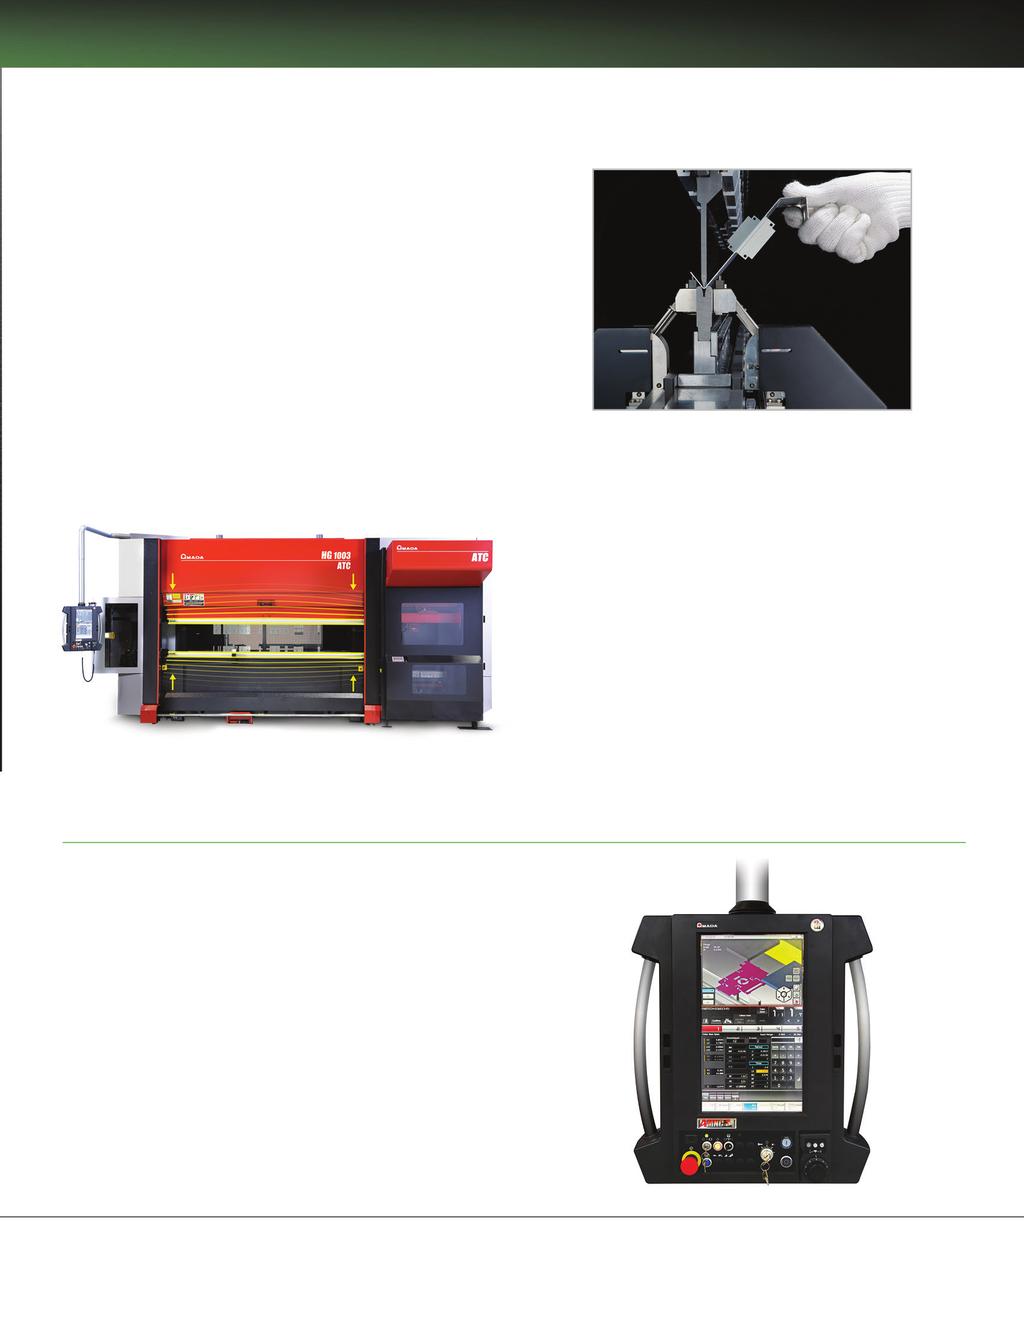 Bİ-S Bend Indicator Sensor Automatic detection and compensation of material spring-back Eliminate test bends and reduce setup Automatic angle adjustment ensures high-quality production bending even